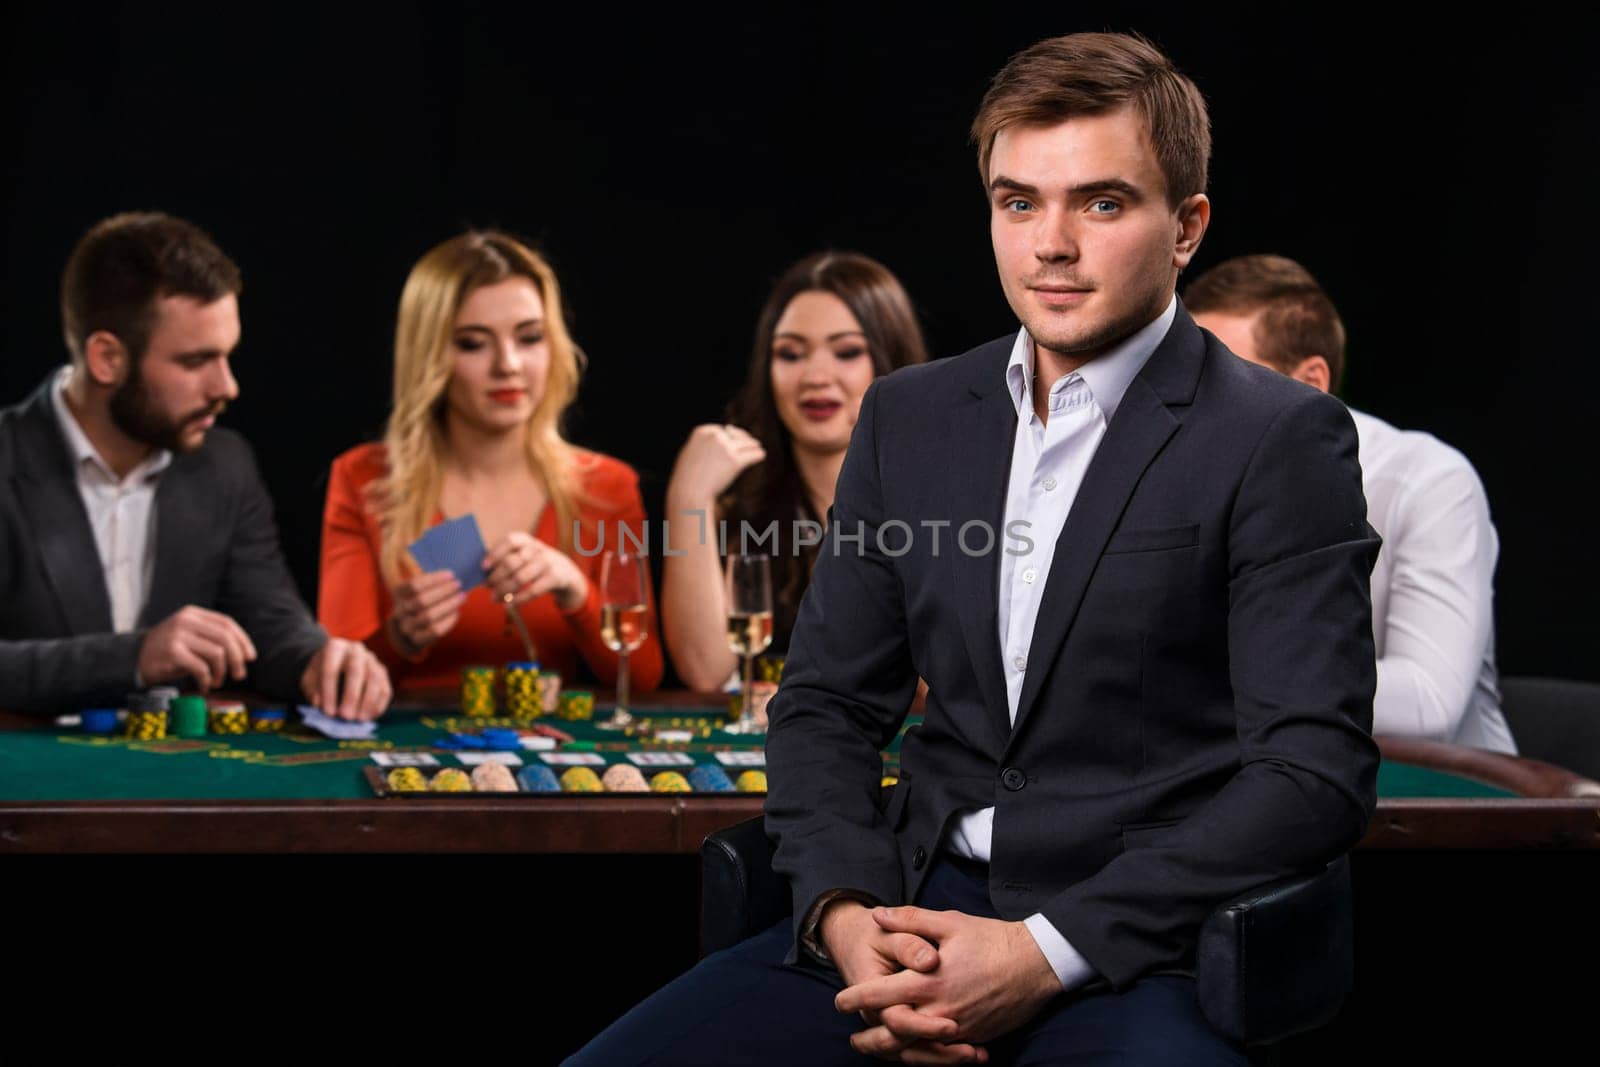 Young people playing poker at the table. Handsome man sitting in the foreground. Casino